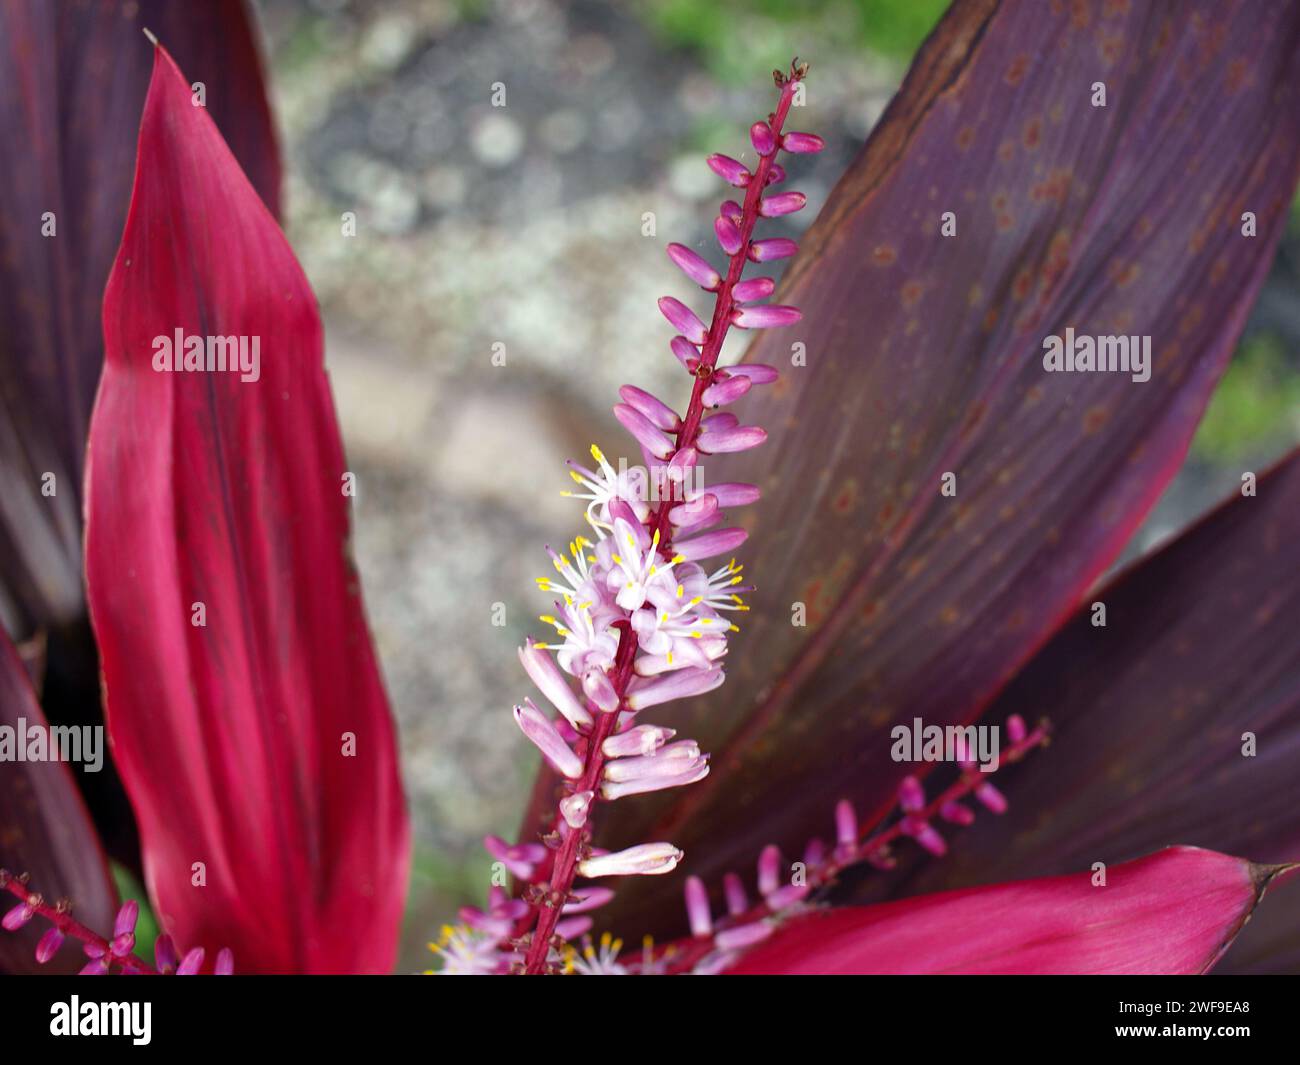 Details of flower of a red species of the Cordyline plant. Stock Photo